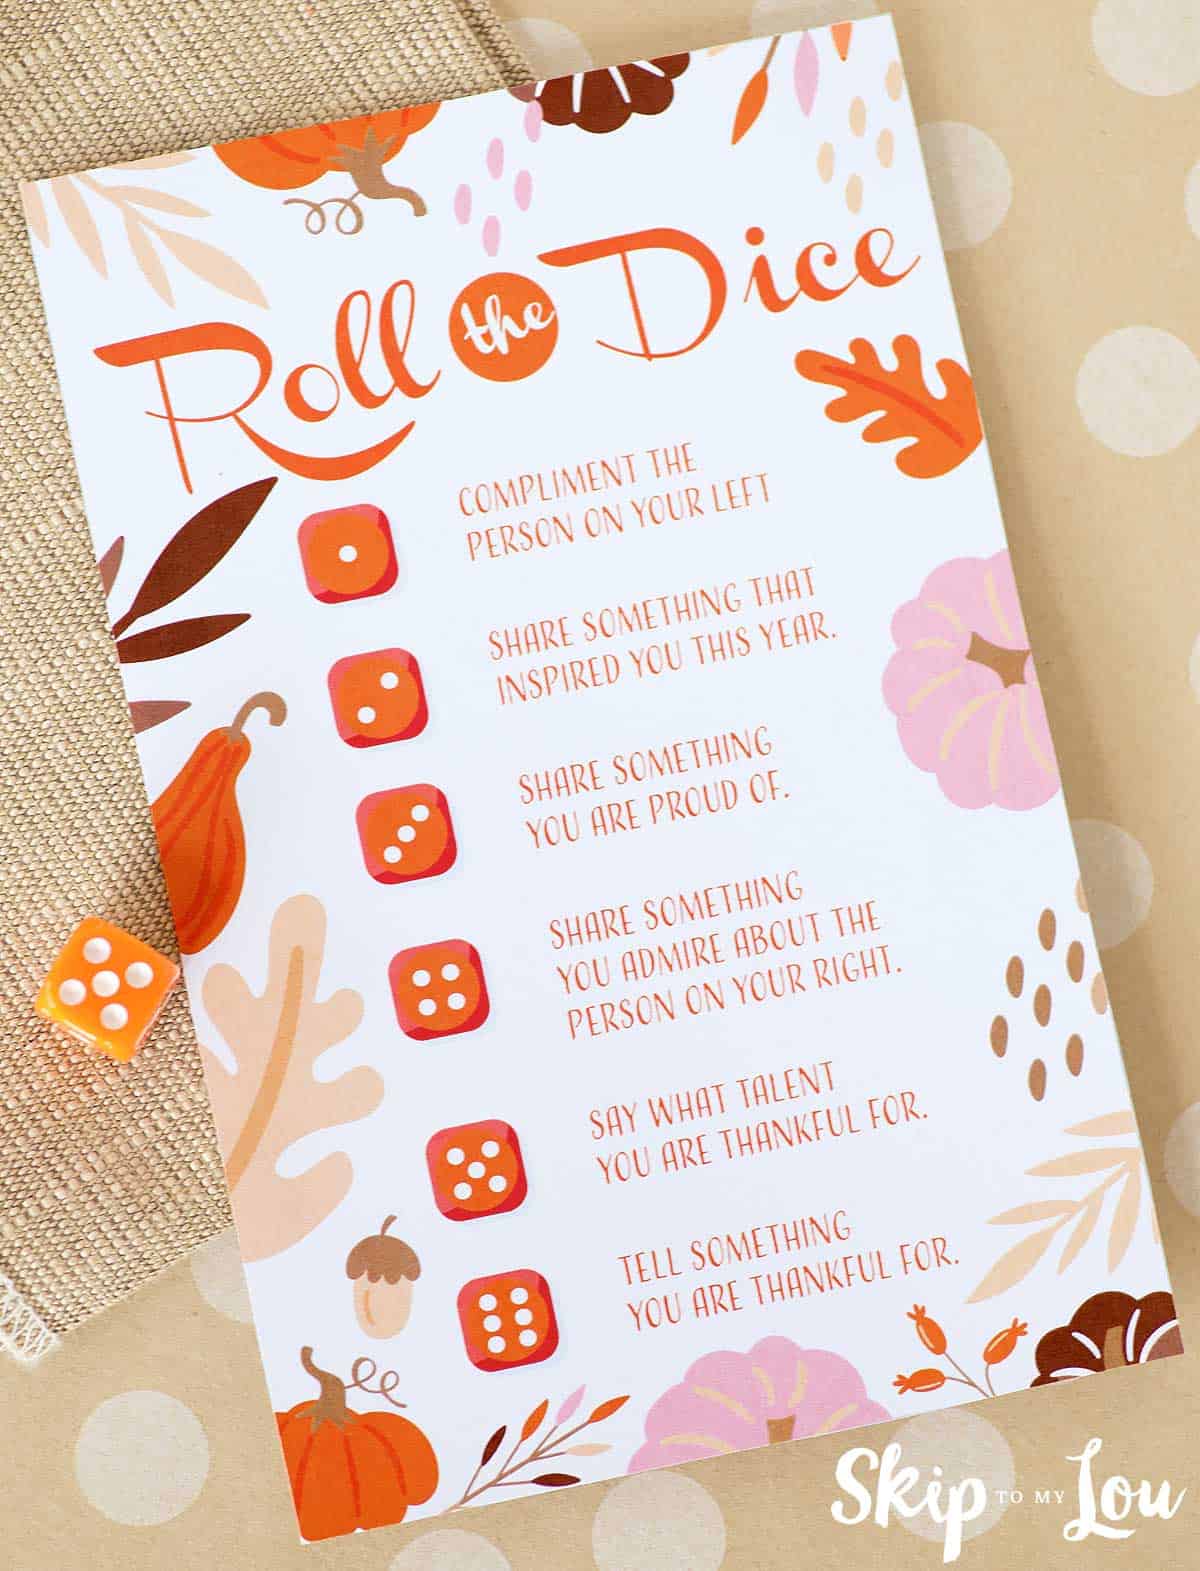 Image shows a printable Roll the dice game with instructions and Autumn decorations.